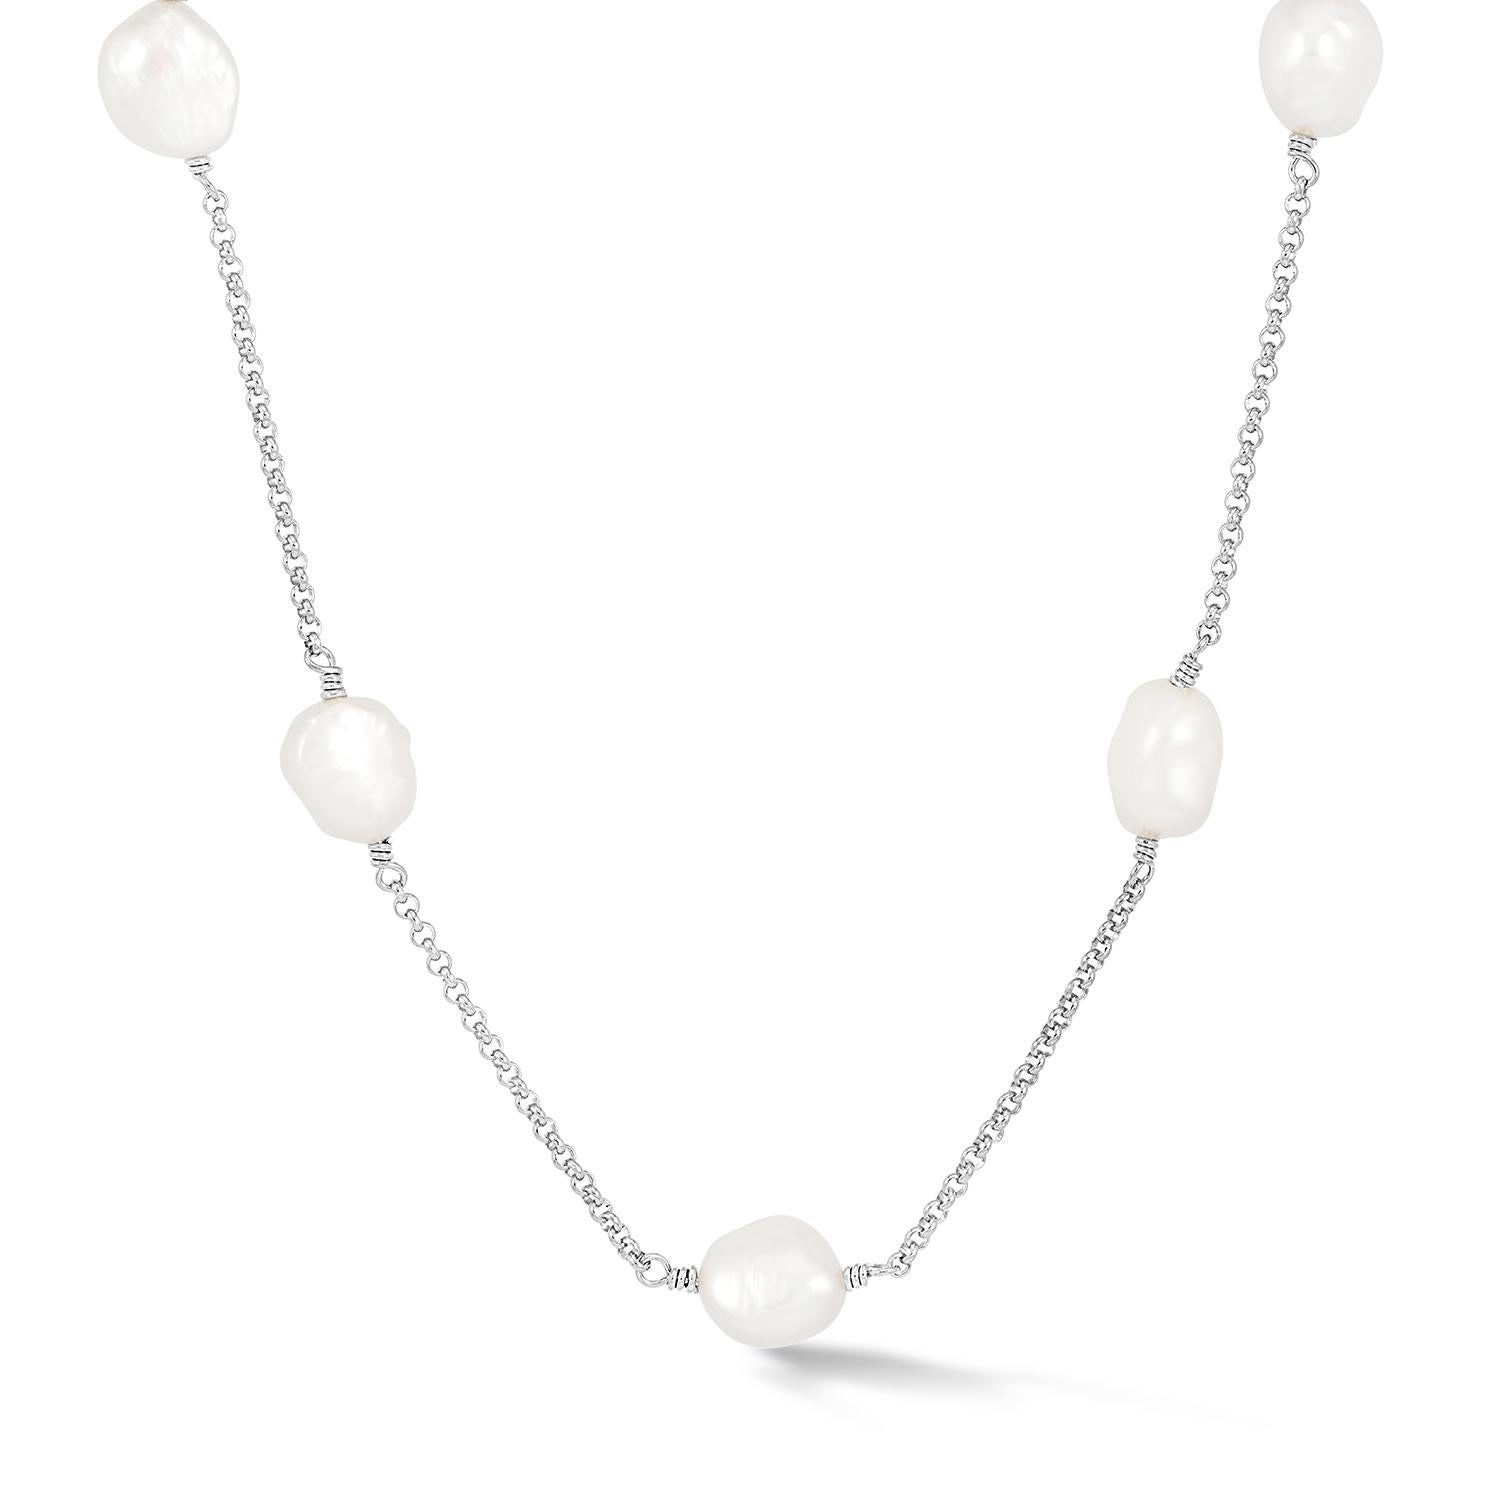 Made in our London studio, this sterling silver long necklace features large, lustrous white baroque freshwater pearls suspended on fine chain. Baroque pearls are naturally irregular in shape and known for their one-of-a-kind nature.

The 40 inch